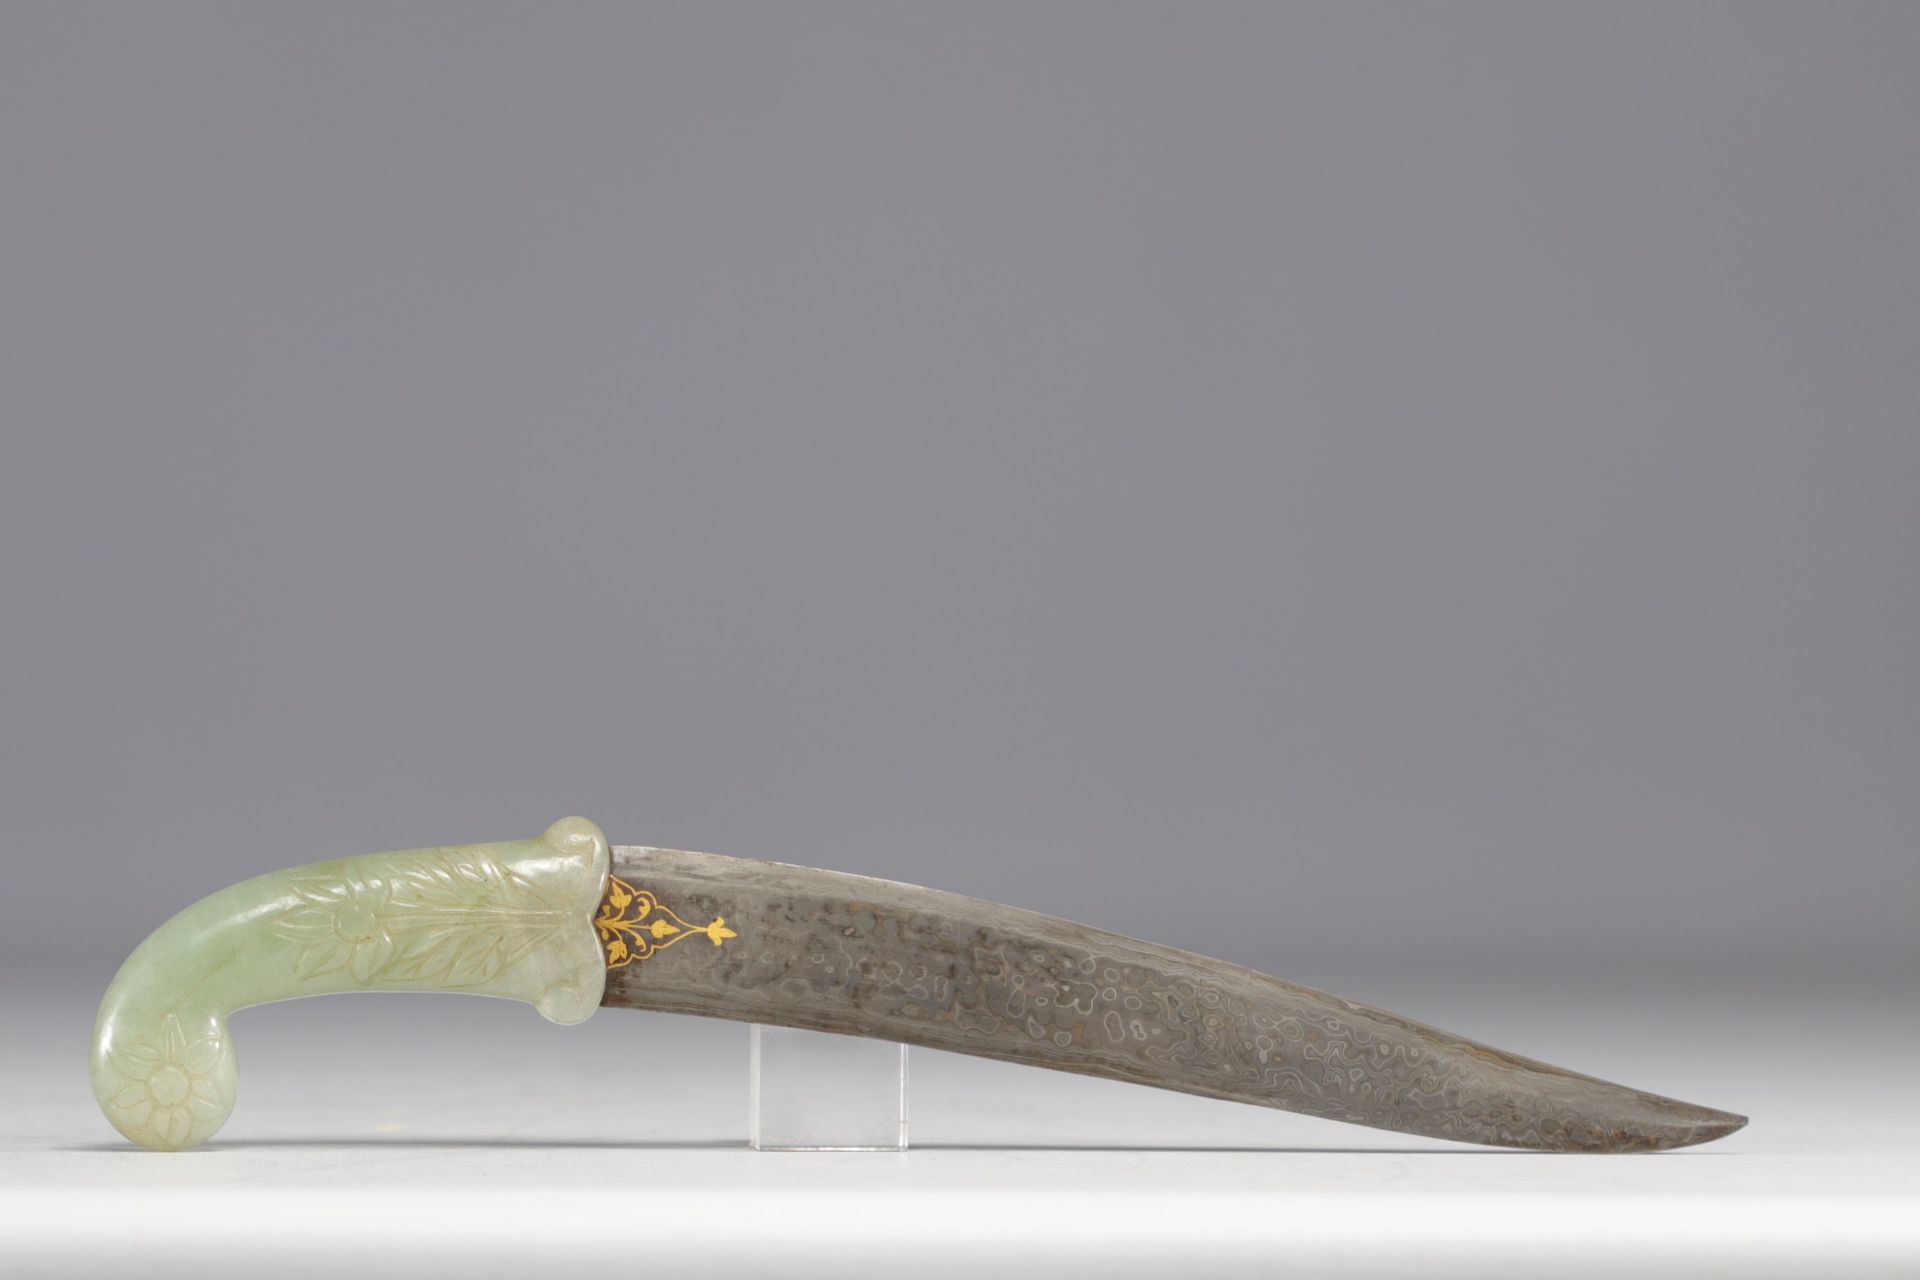 Mongolian-style dagger, jade handle, damascened blade with gold inlay. - Image 3 of 3